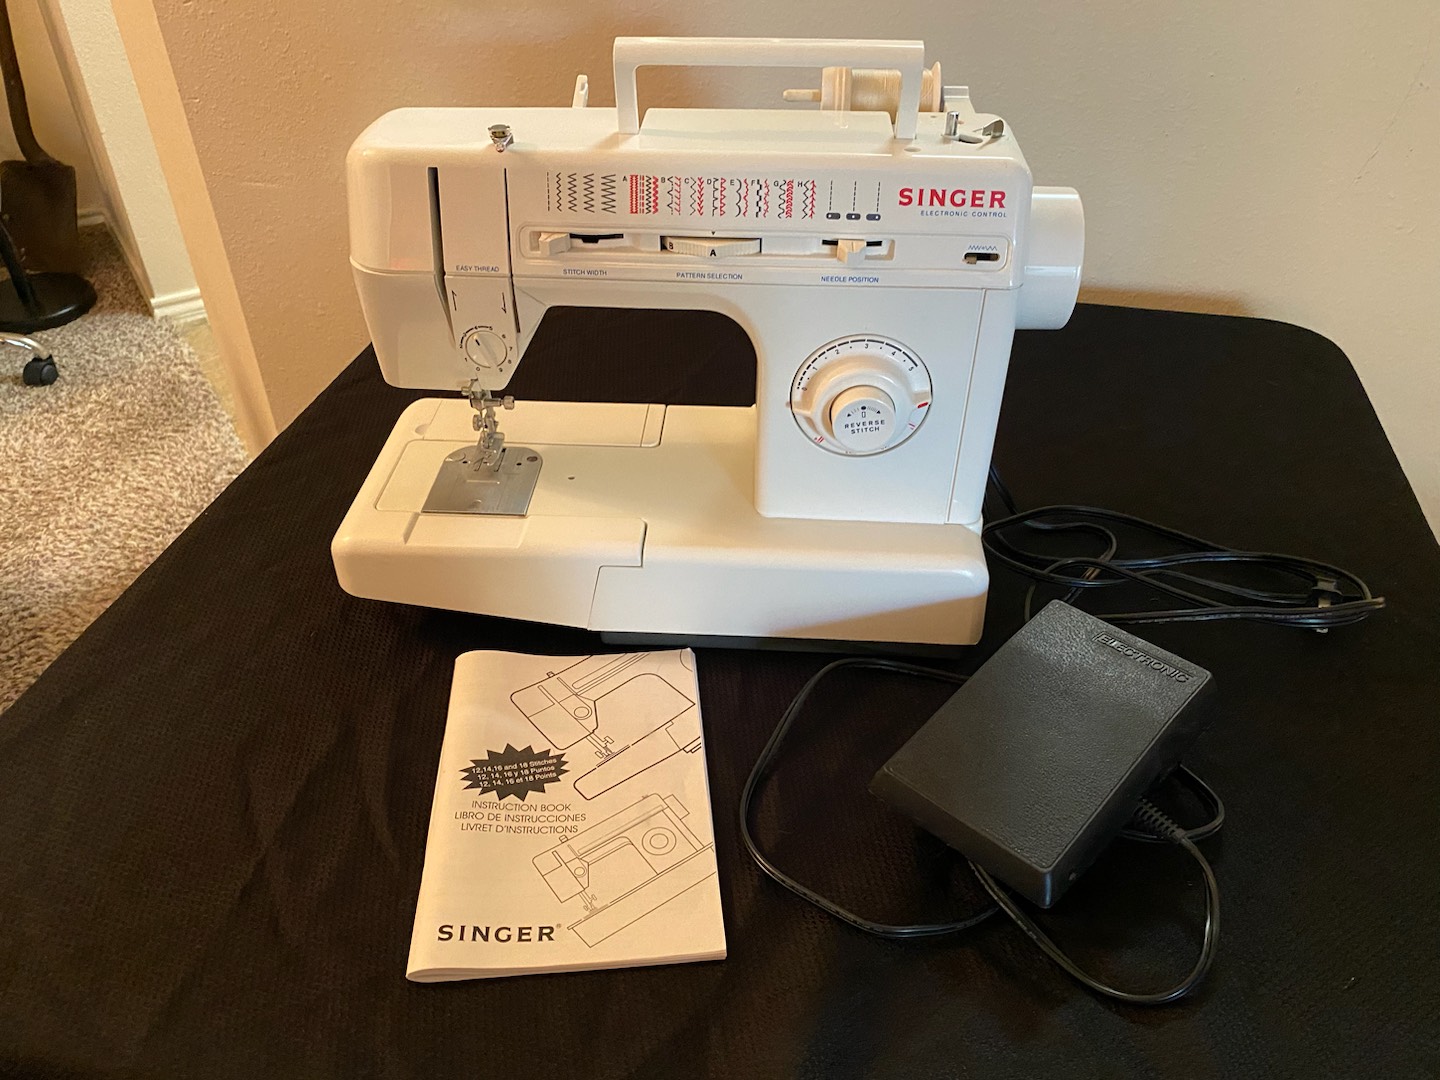 Singer Sewing Machines for sale in Winfield, Kansas